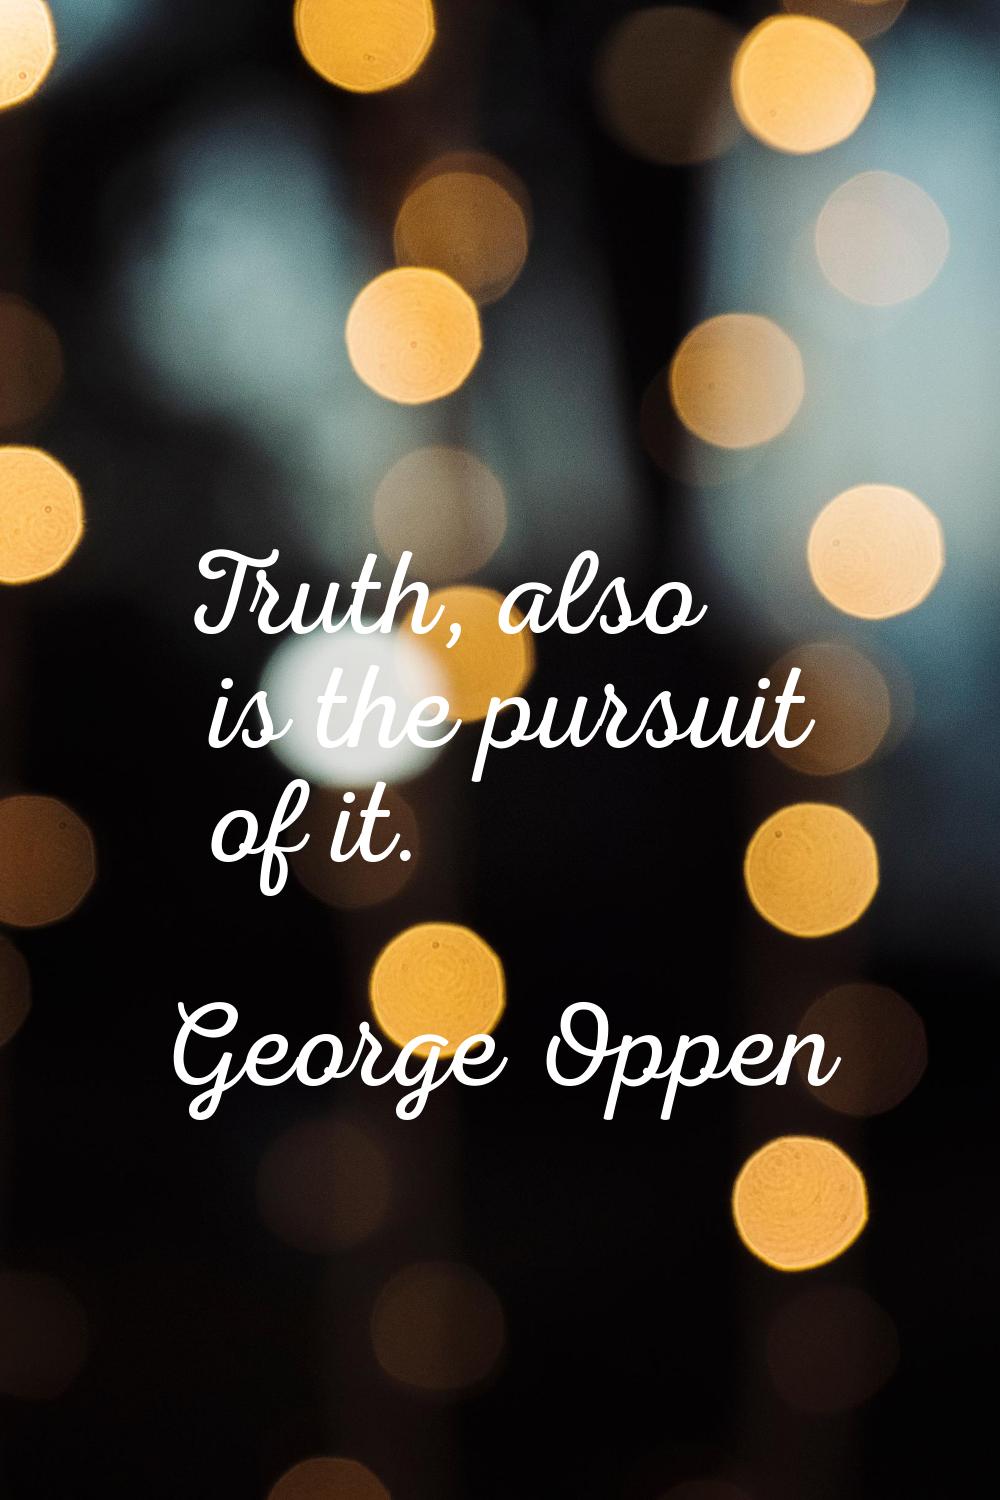 Truth, also is the pursuit of it.